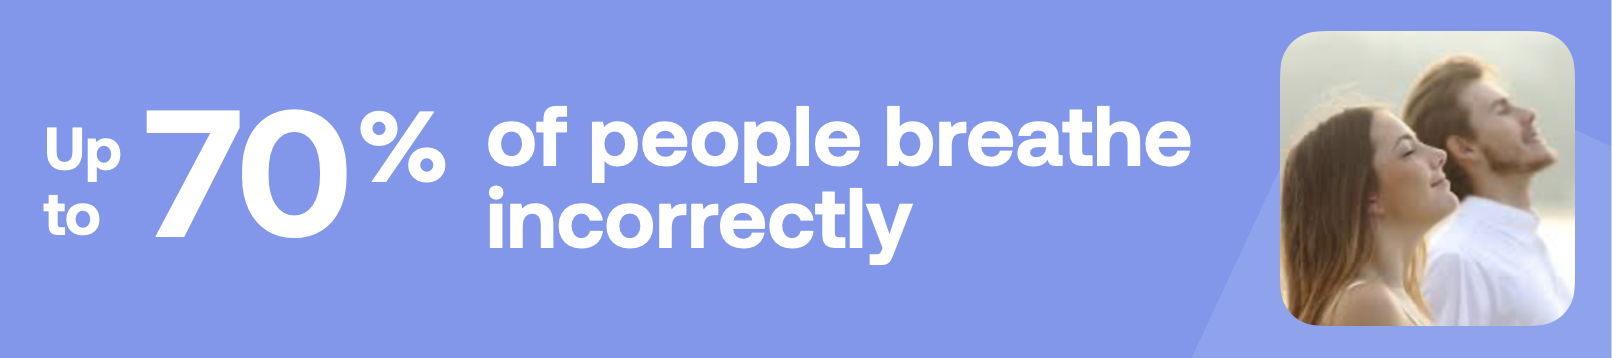 Up to 70% of people breathe incorrectly